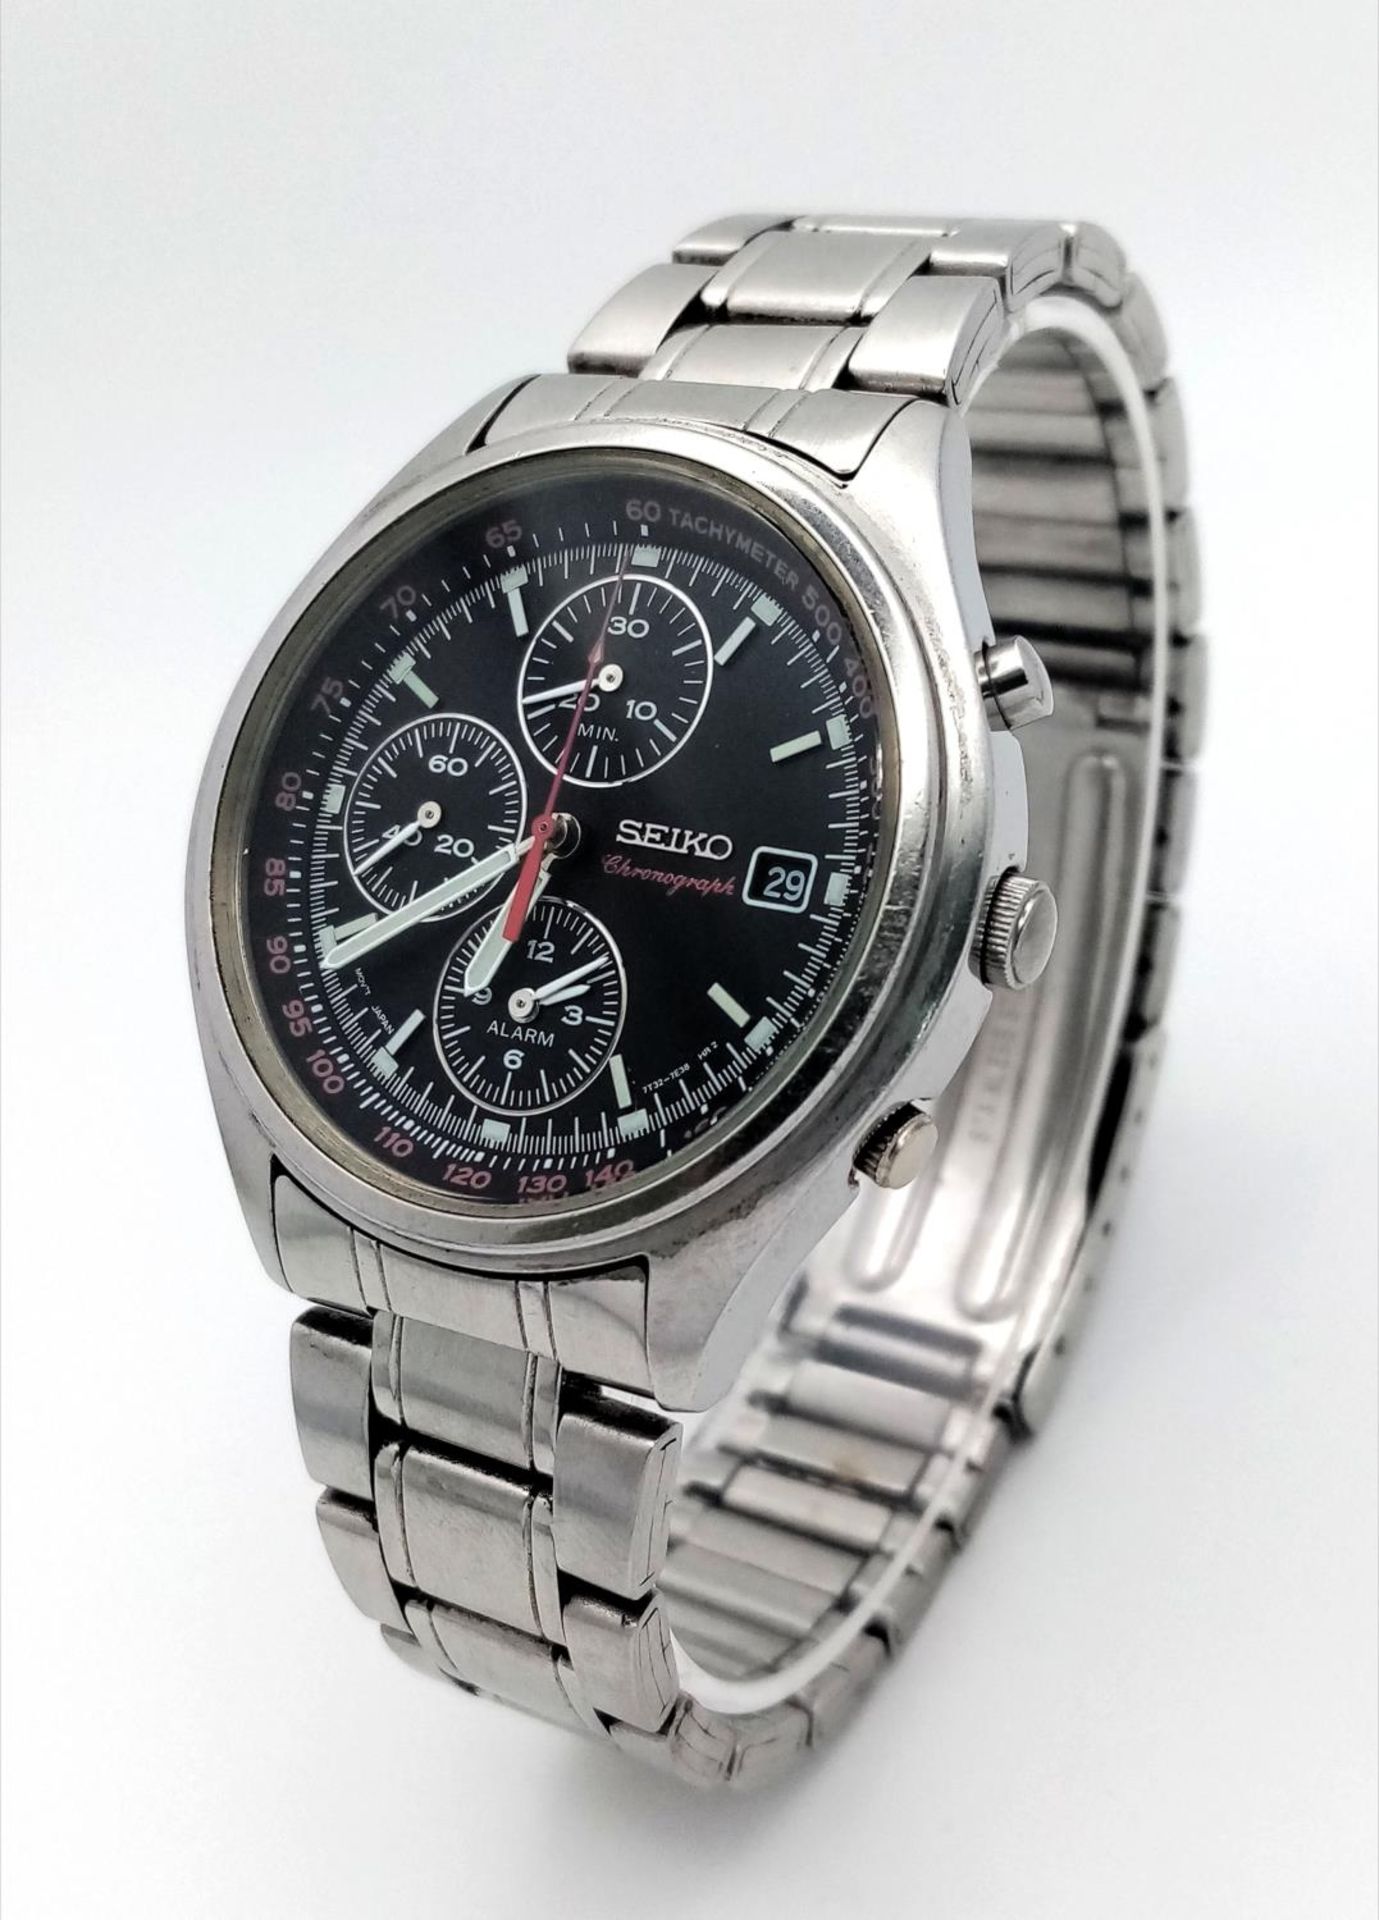 A Seiko Chronograph Quartz Alarm Gents Watch. Stainless steel bracelet and case - 38mm. Black dial - Image 2 of 7